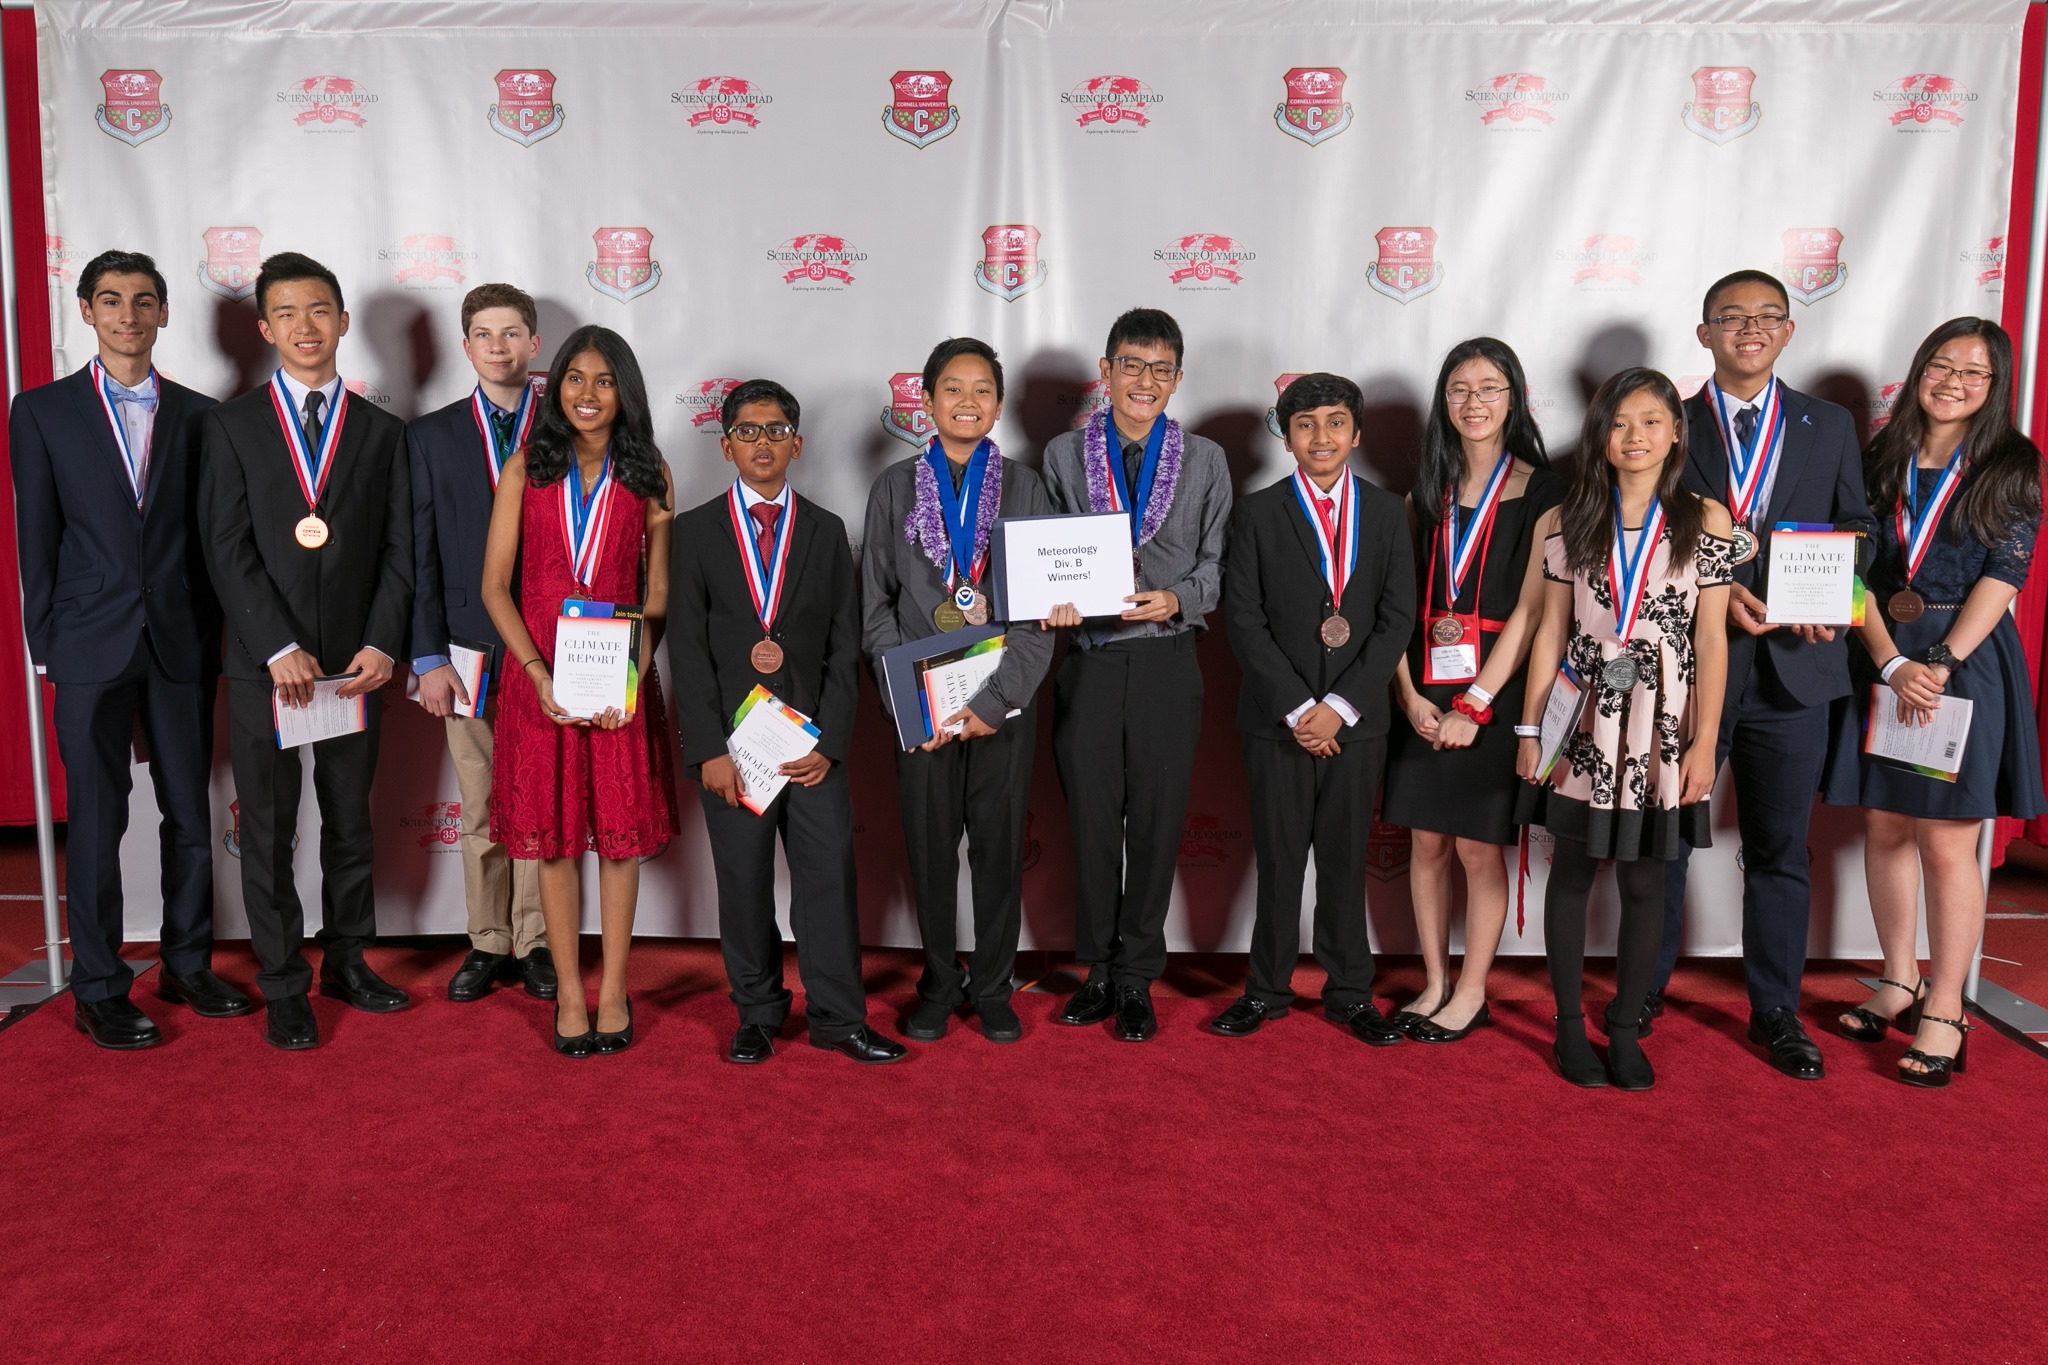 Winners of the Meteorology Division B (middle school) competition at the 2019 Science Olympiad hosted at Cornell University.